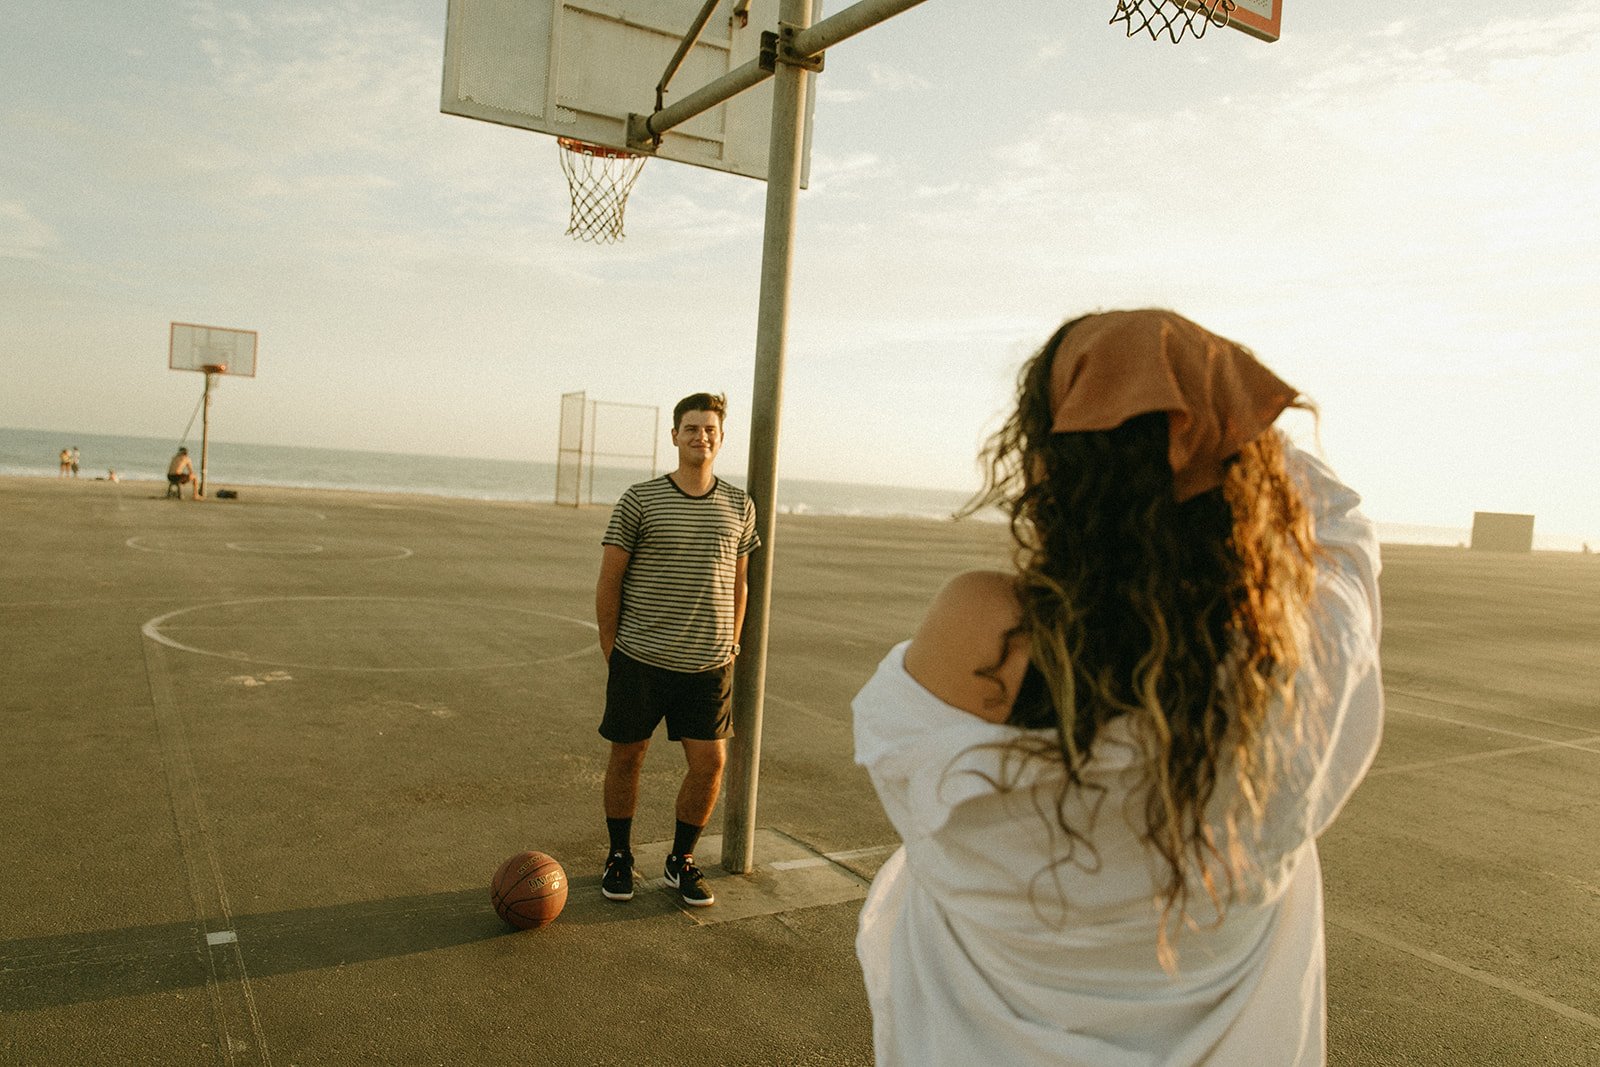 Newport Beach Engagement photo session on the beach during sunset on a basketball court